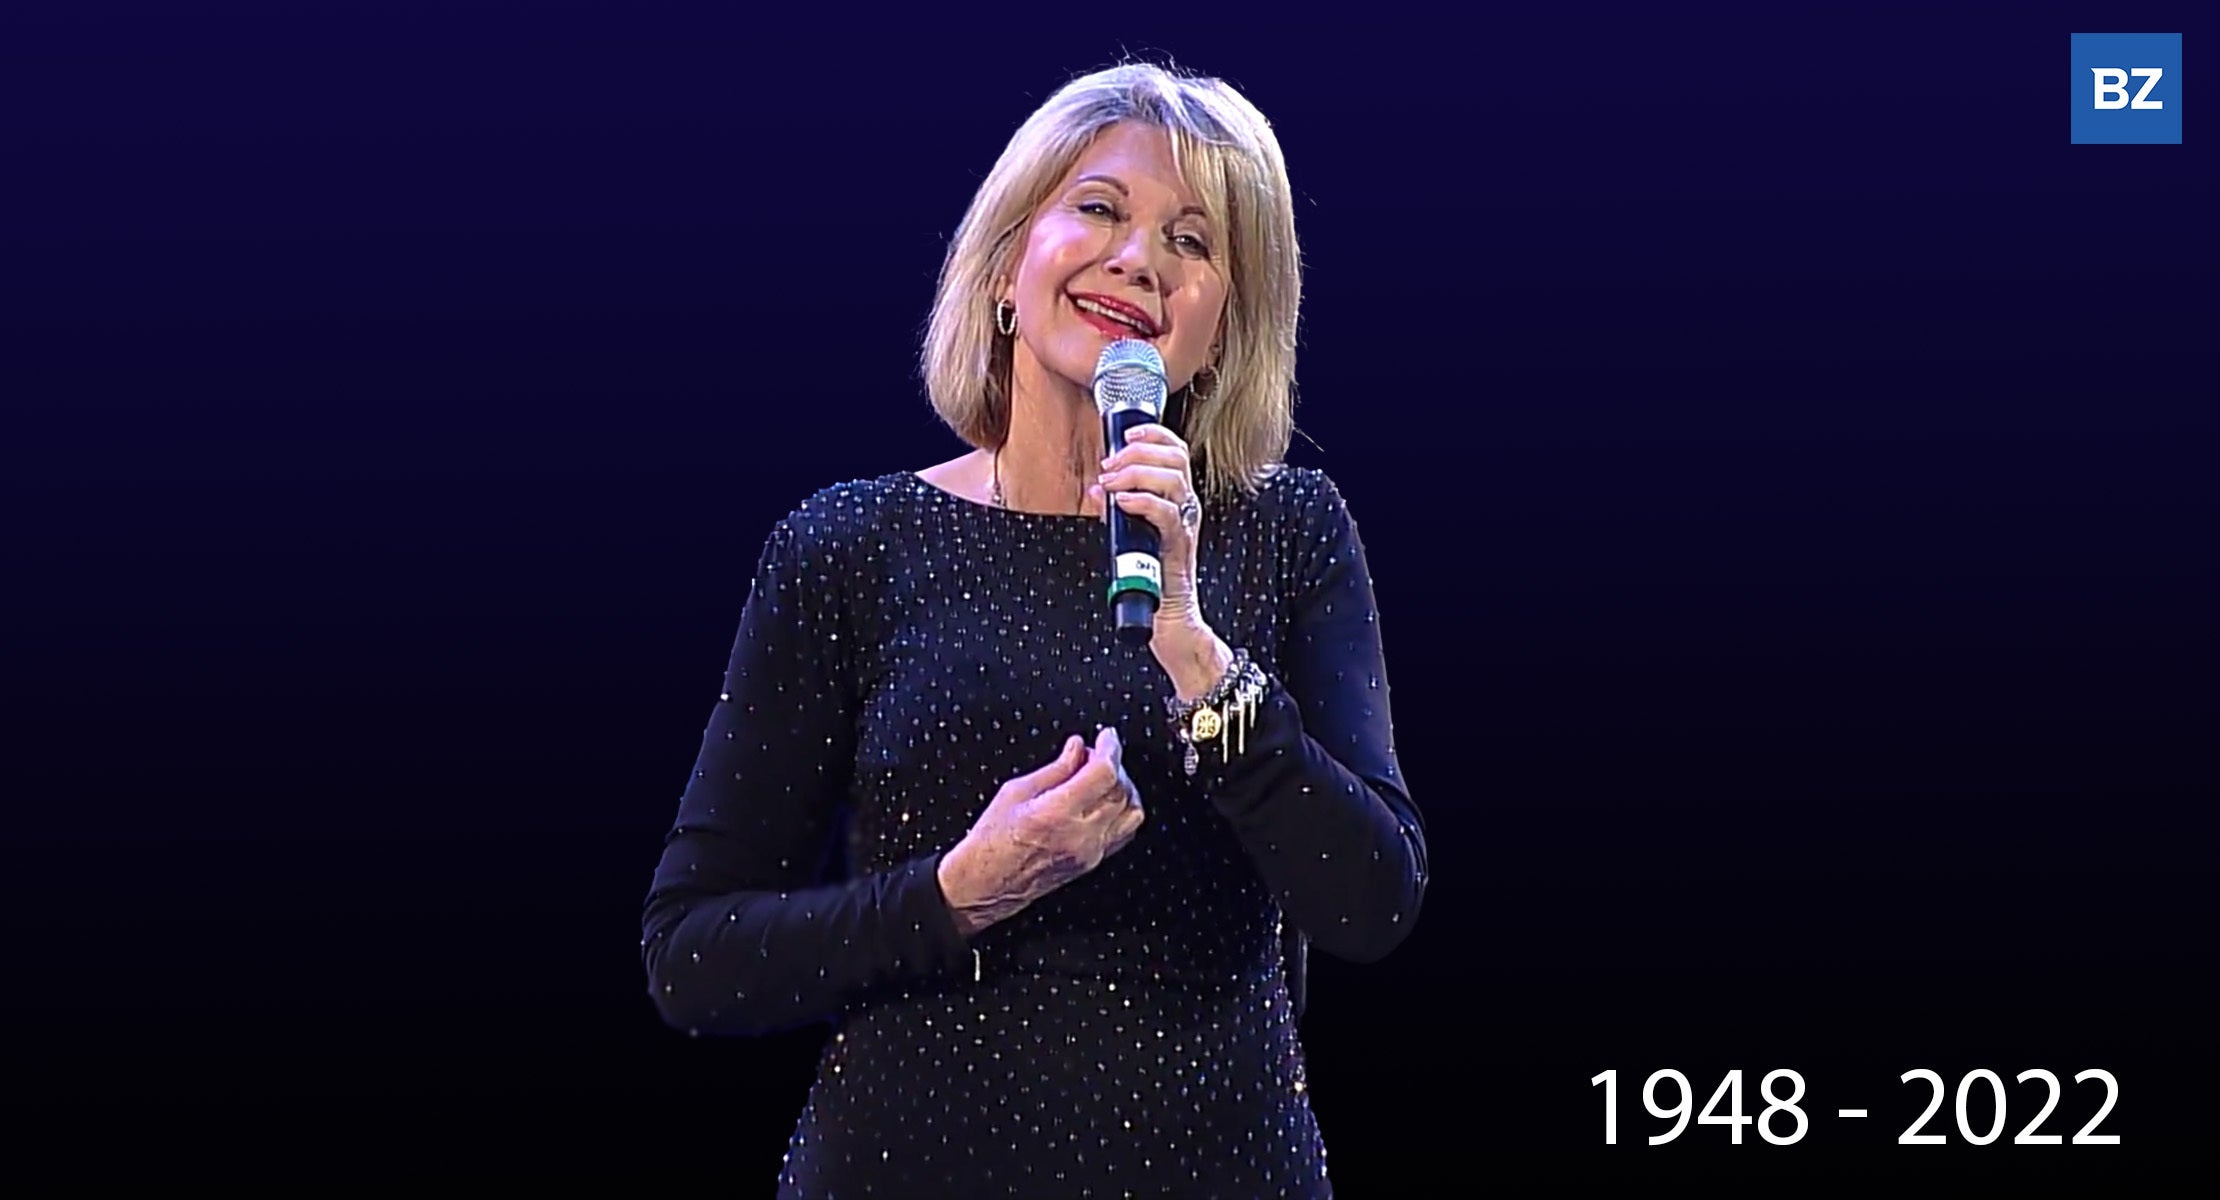 Olivia Newton-John Dies At 73: 'Optimism And Cannabis' Kept Her Going In Final Years Of Struggling With Cancer